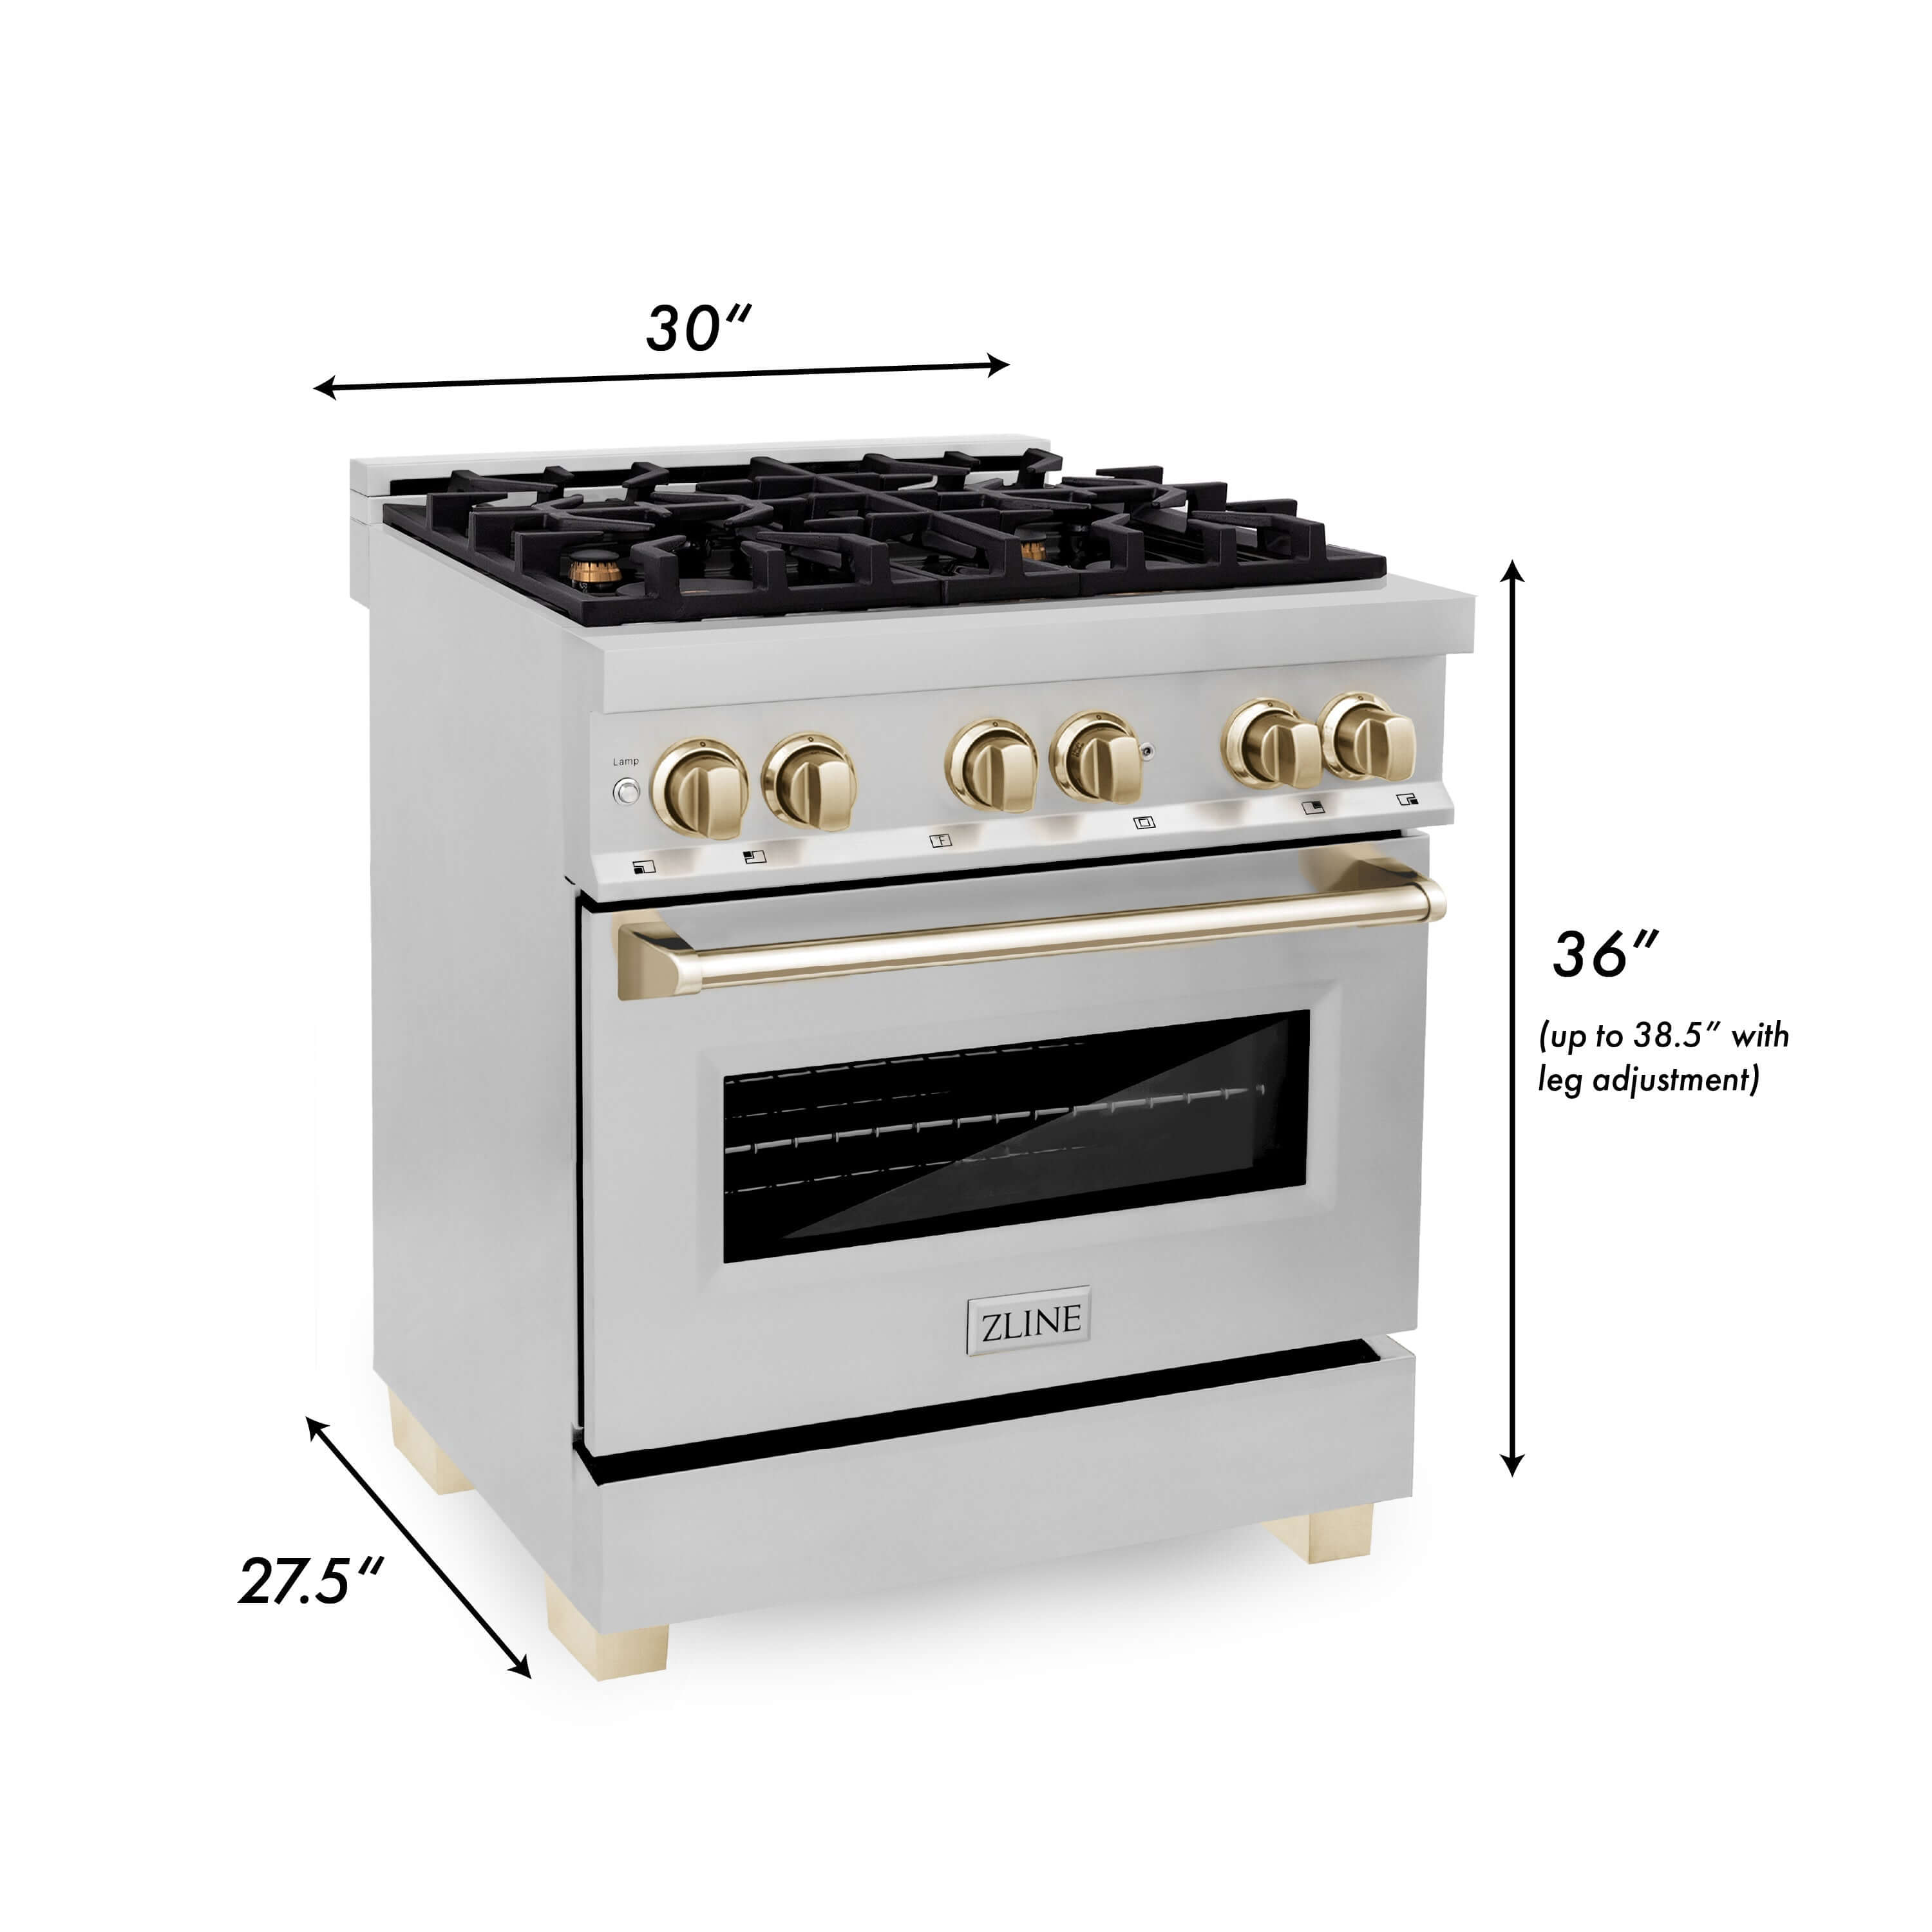 ZLINE Autograph Edition Kitchen Package in Stainless Steel with 30 in. Dual Fuel Range, 30 in. Range Hood, and 24 in. Dishwasher with Polished Gold Accents (3AKP-RARHDWM30-G) dimensional diagram with measurements.